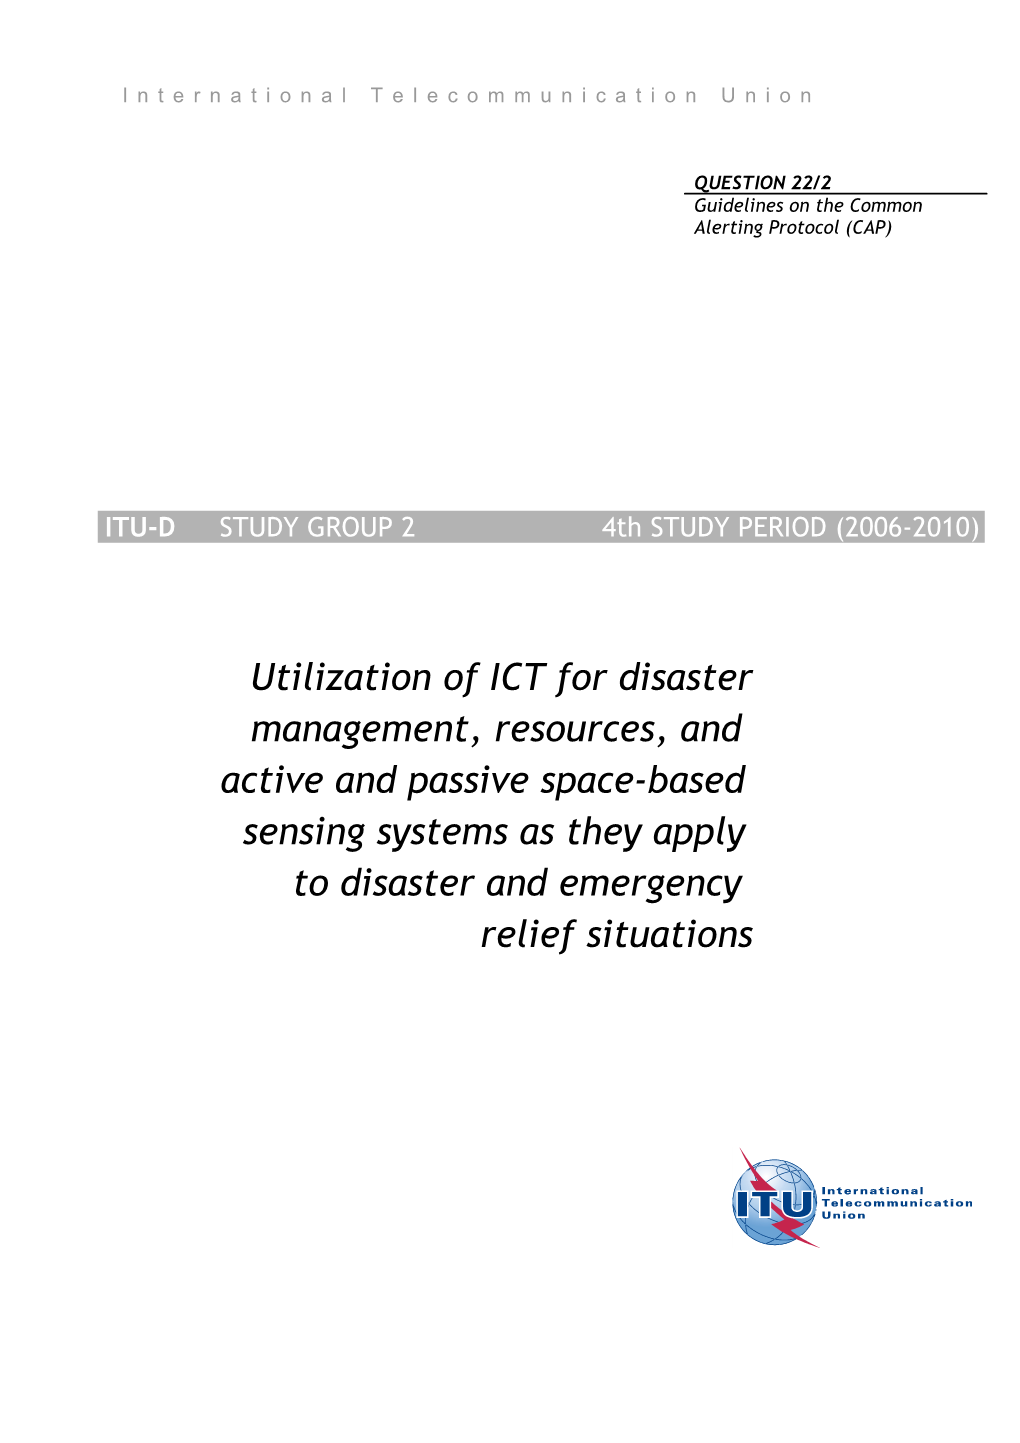 Request for Comments on the Draft Outline for the September 2003 Report for Itu-D Study Group 1